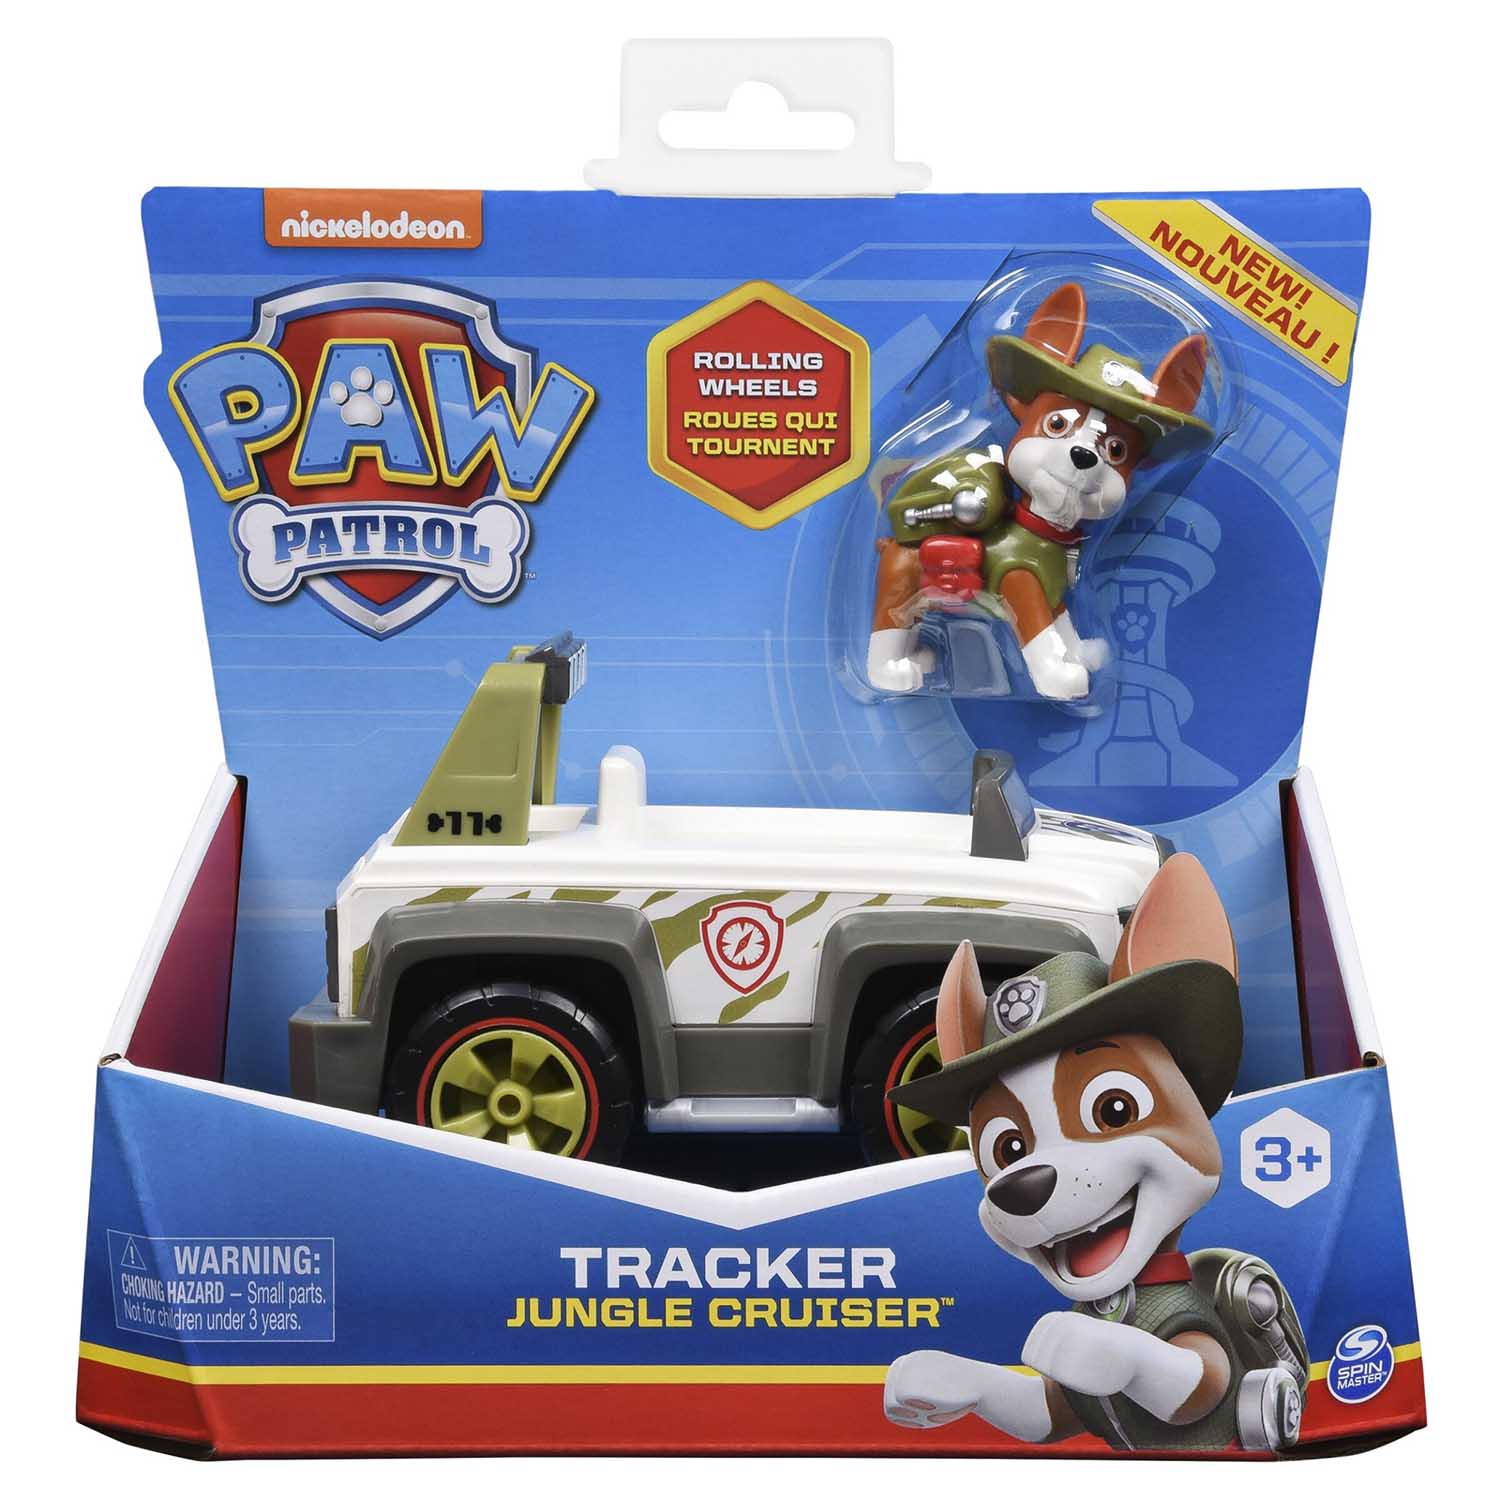 Paw Patrol - Tracker Jungle Cruiser Vehicle with Collectible Figure